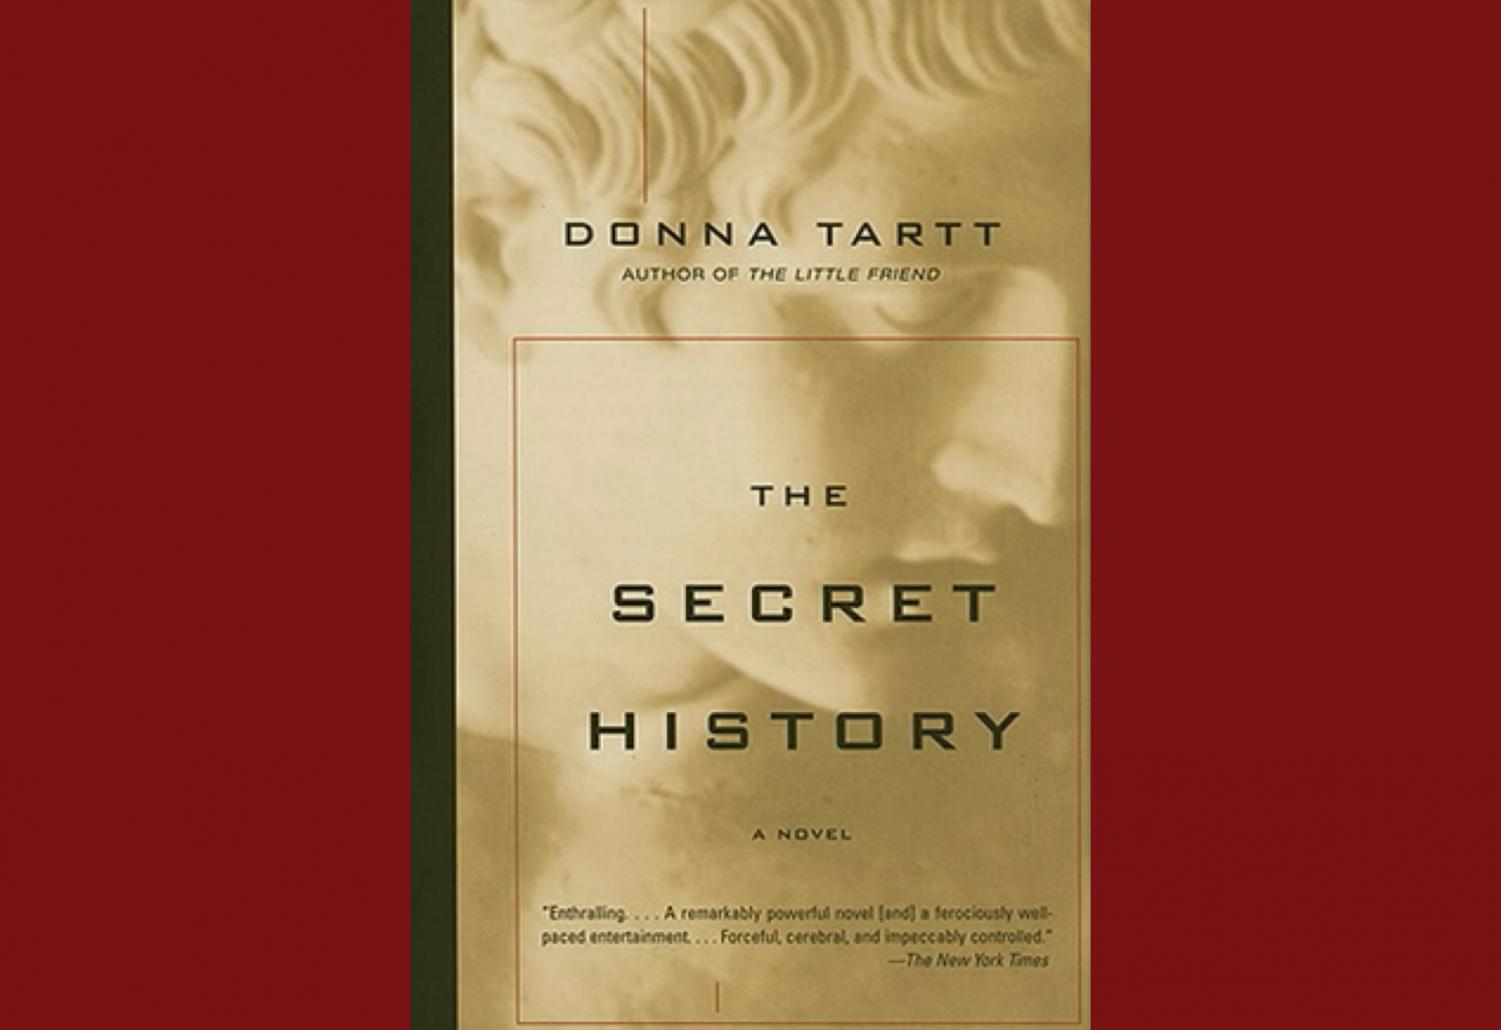 The Secret History: greek mythology, trust funds and first degree